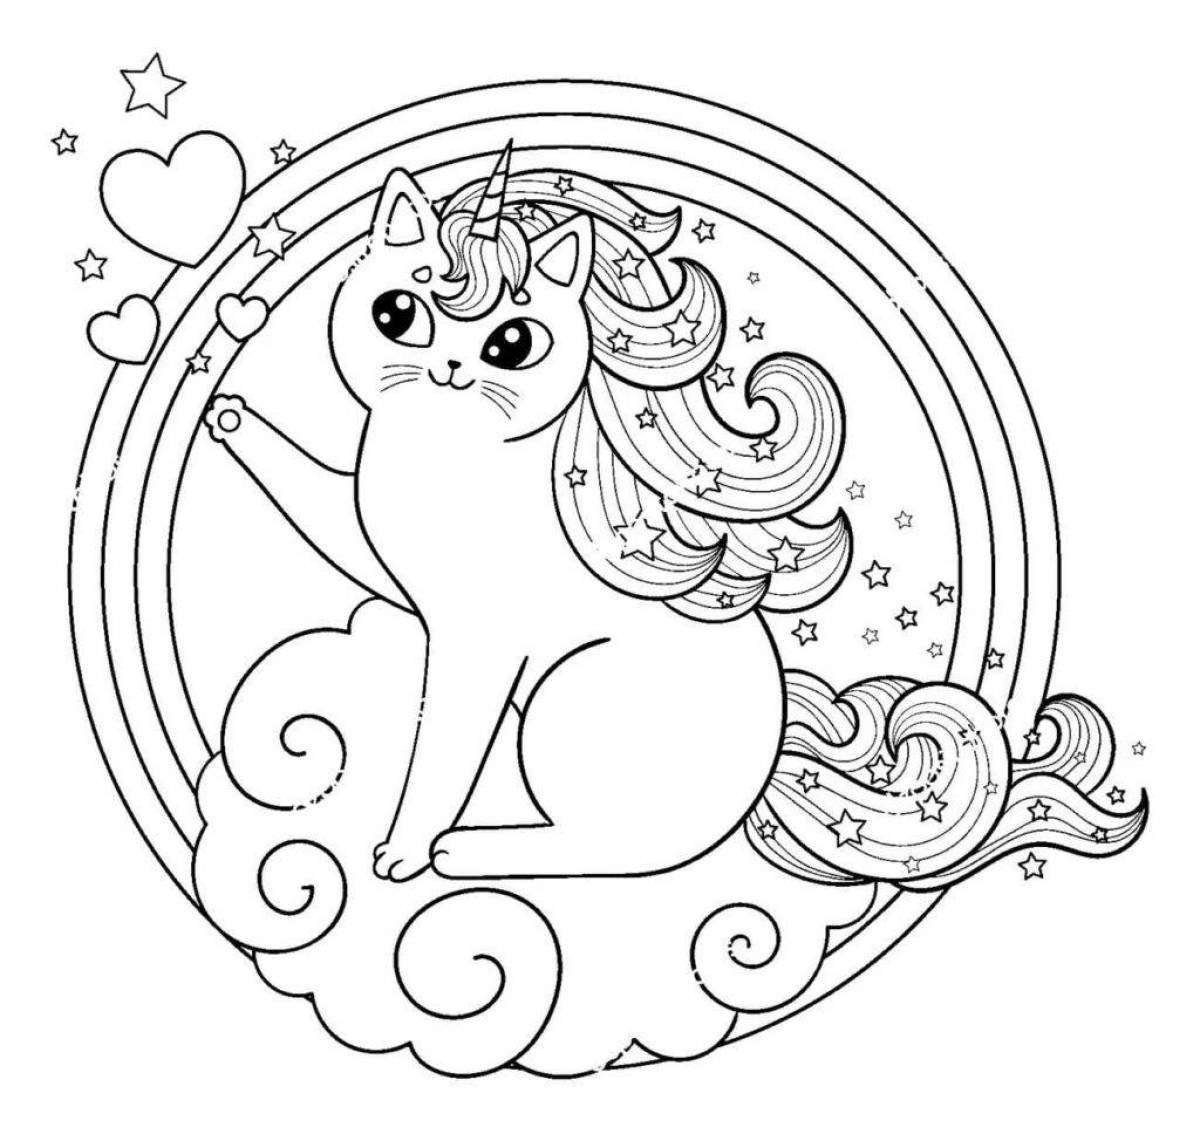 Lovely coloring cat unicorn